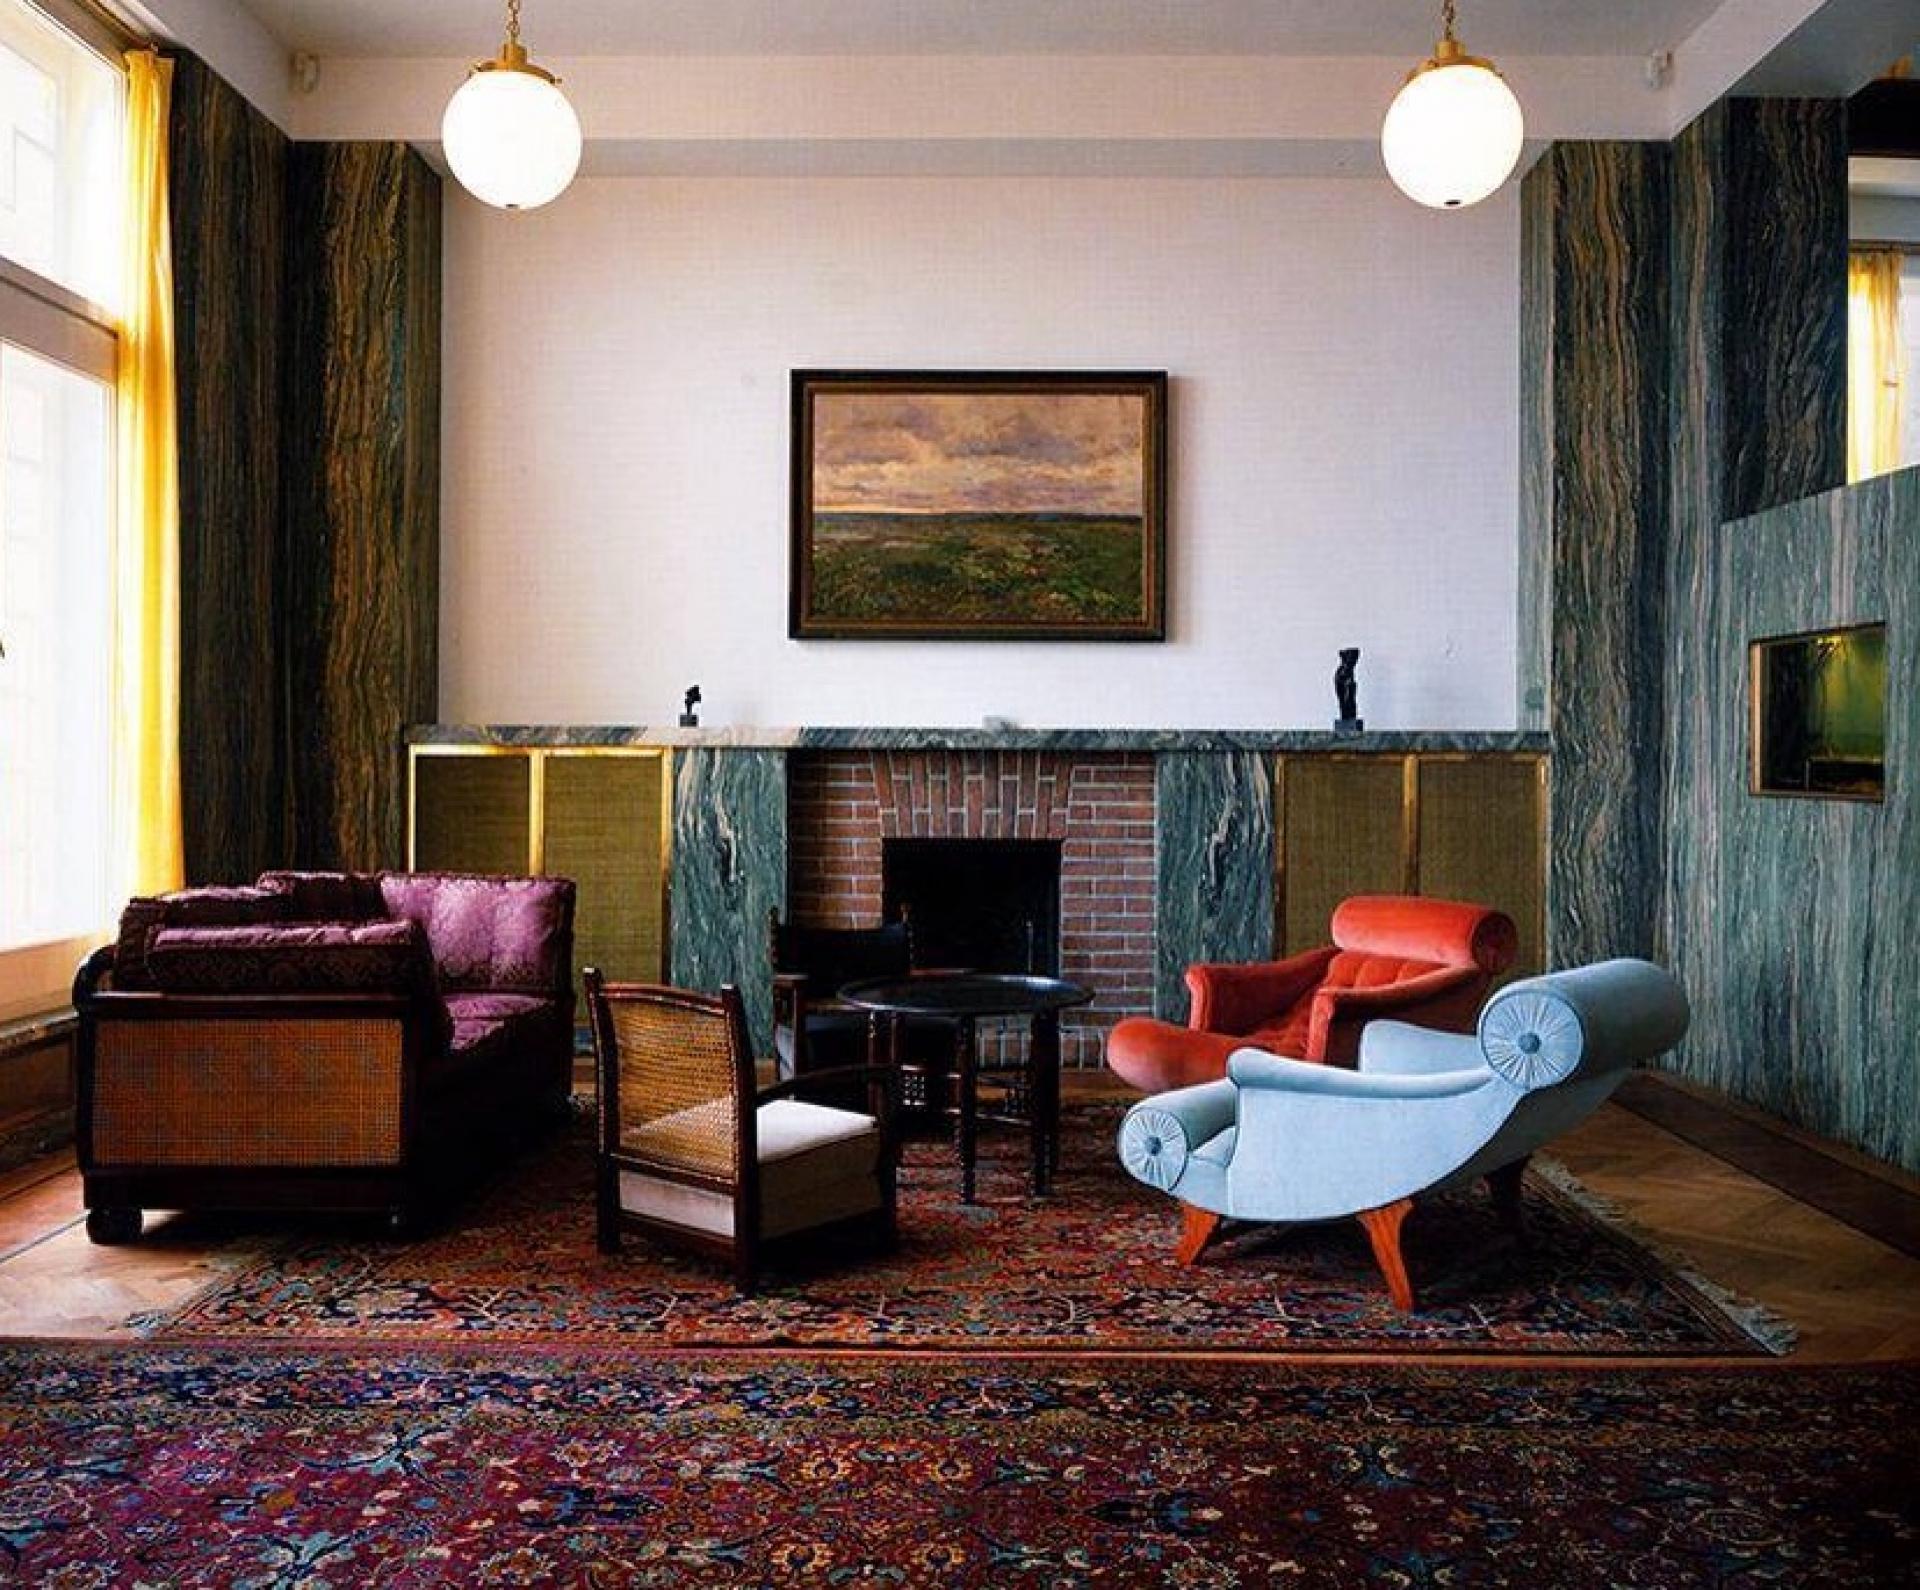 Finding inspiration in the work of Adolf Loos: Villa Muller | Source © Fala